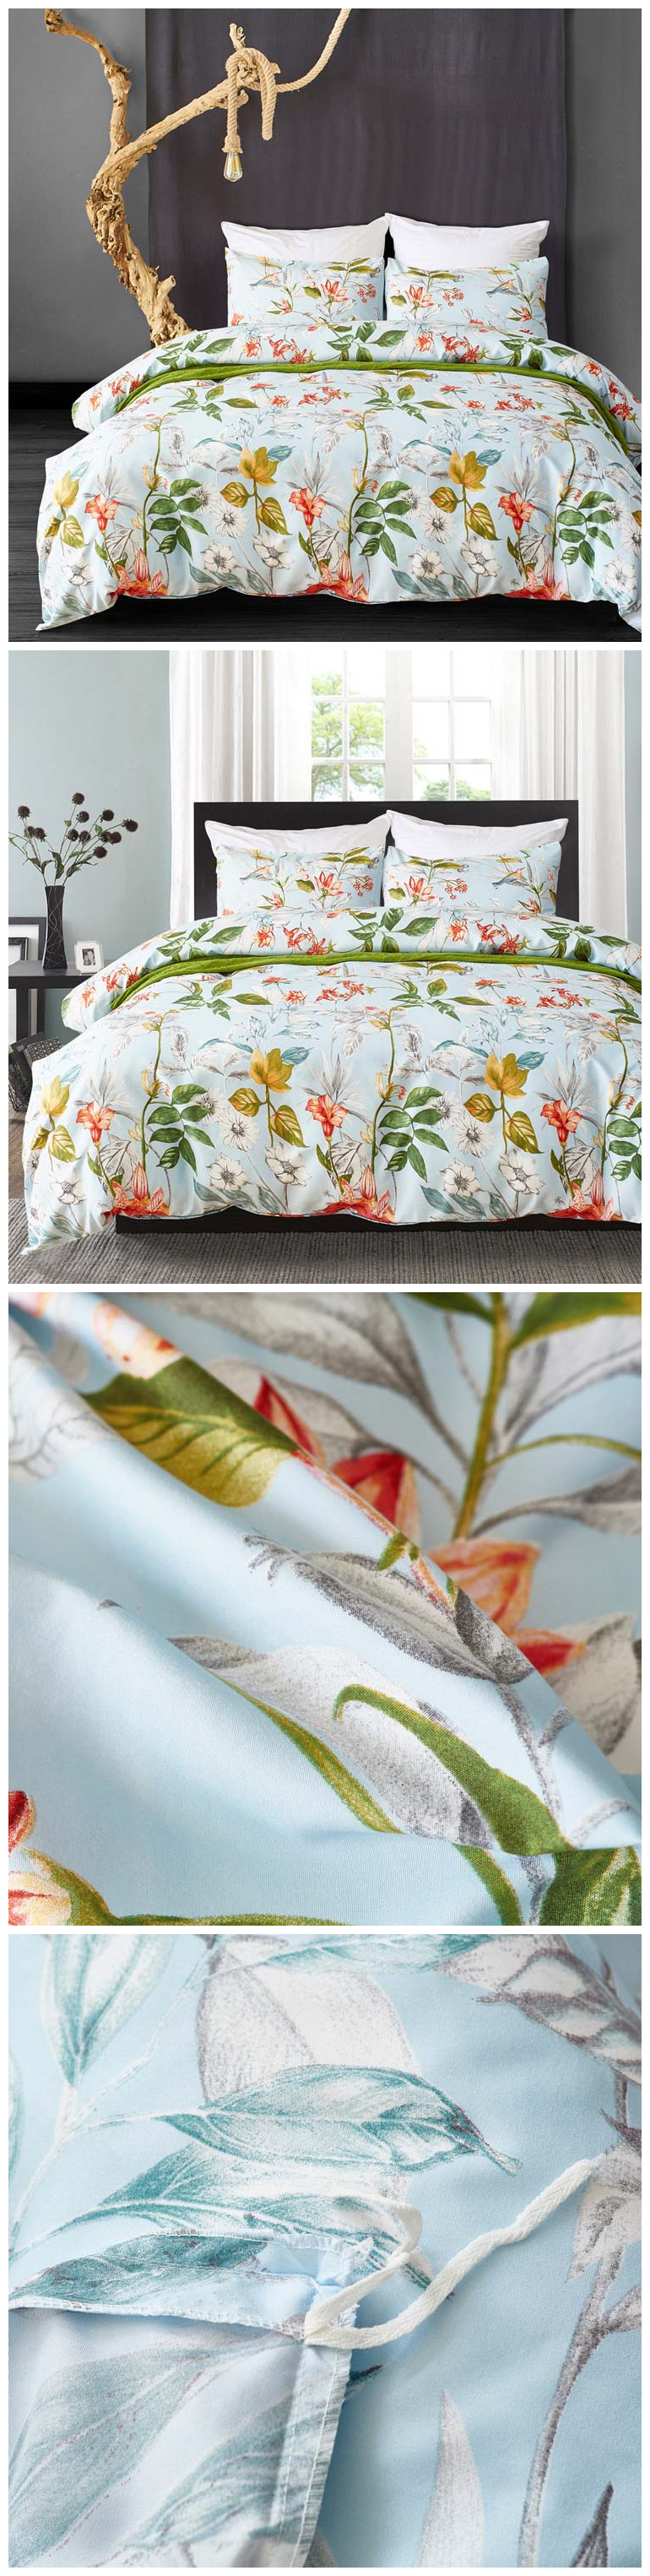 Made in China Flower Printing Bedding Set Bed Sheet